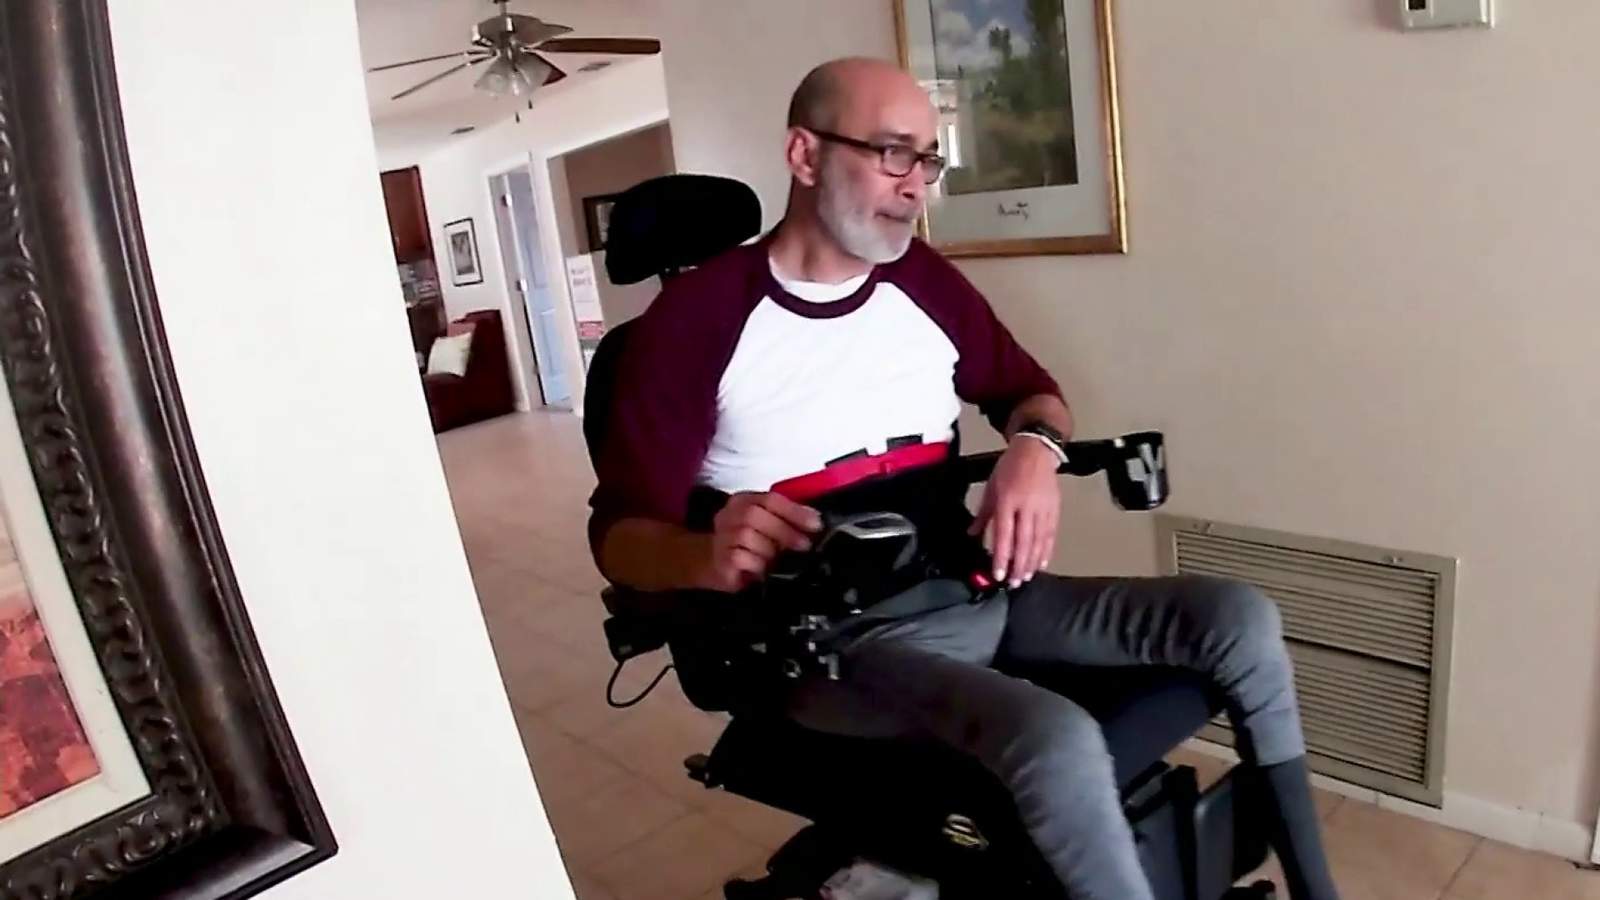 Paralyzed man suing Orange County Sheriff’s Office for violating civil rights